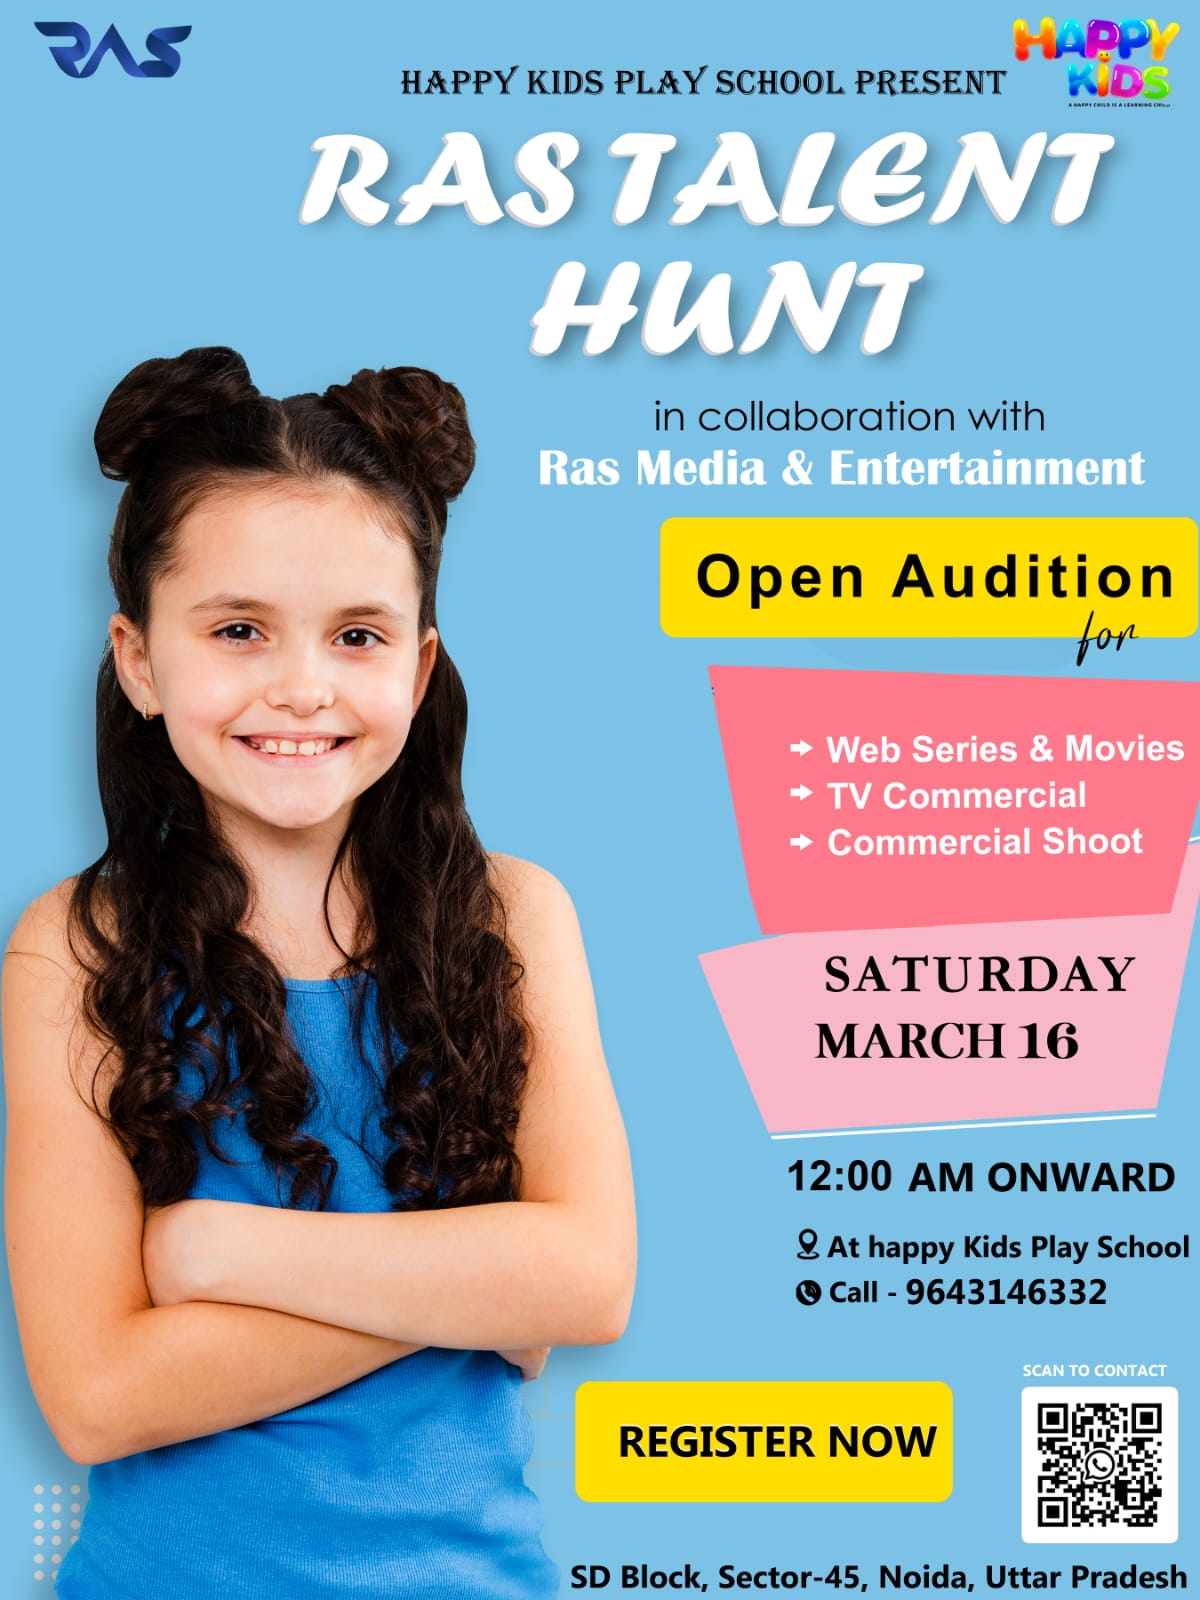 Happy Kids Play School Present Ras talent Hunt in Collaboration with Ras Media & Entertainment.